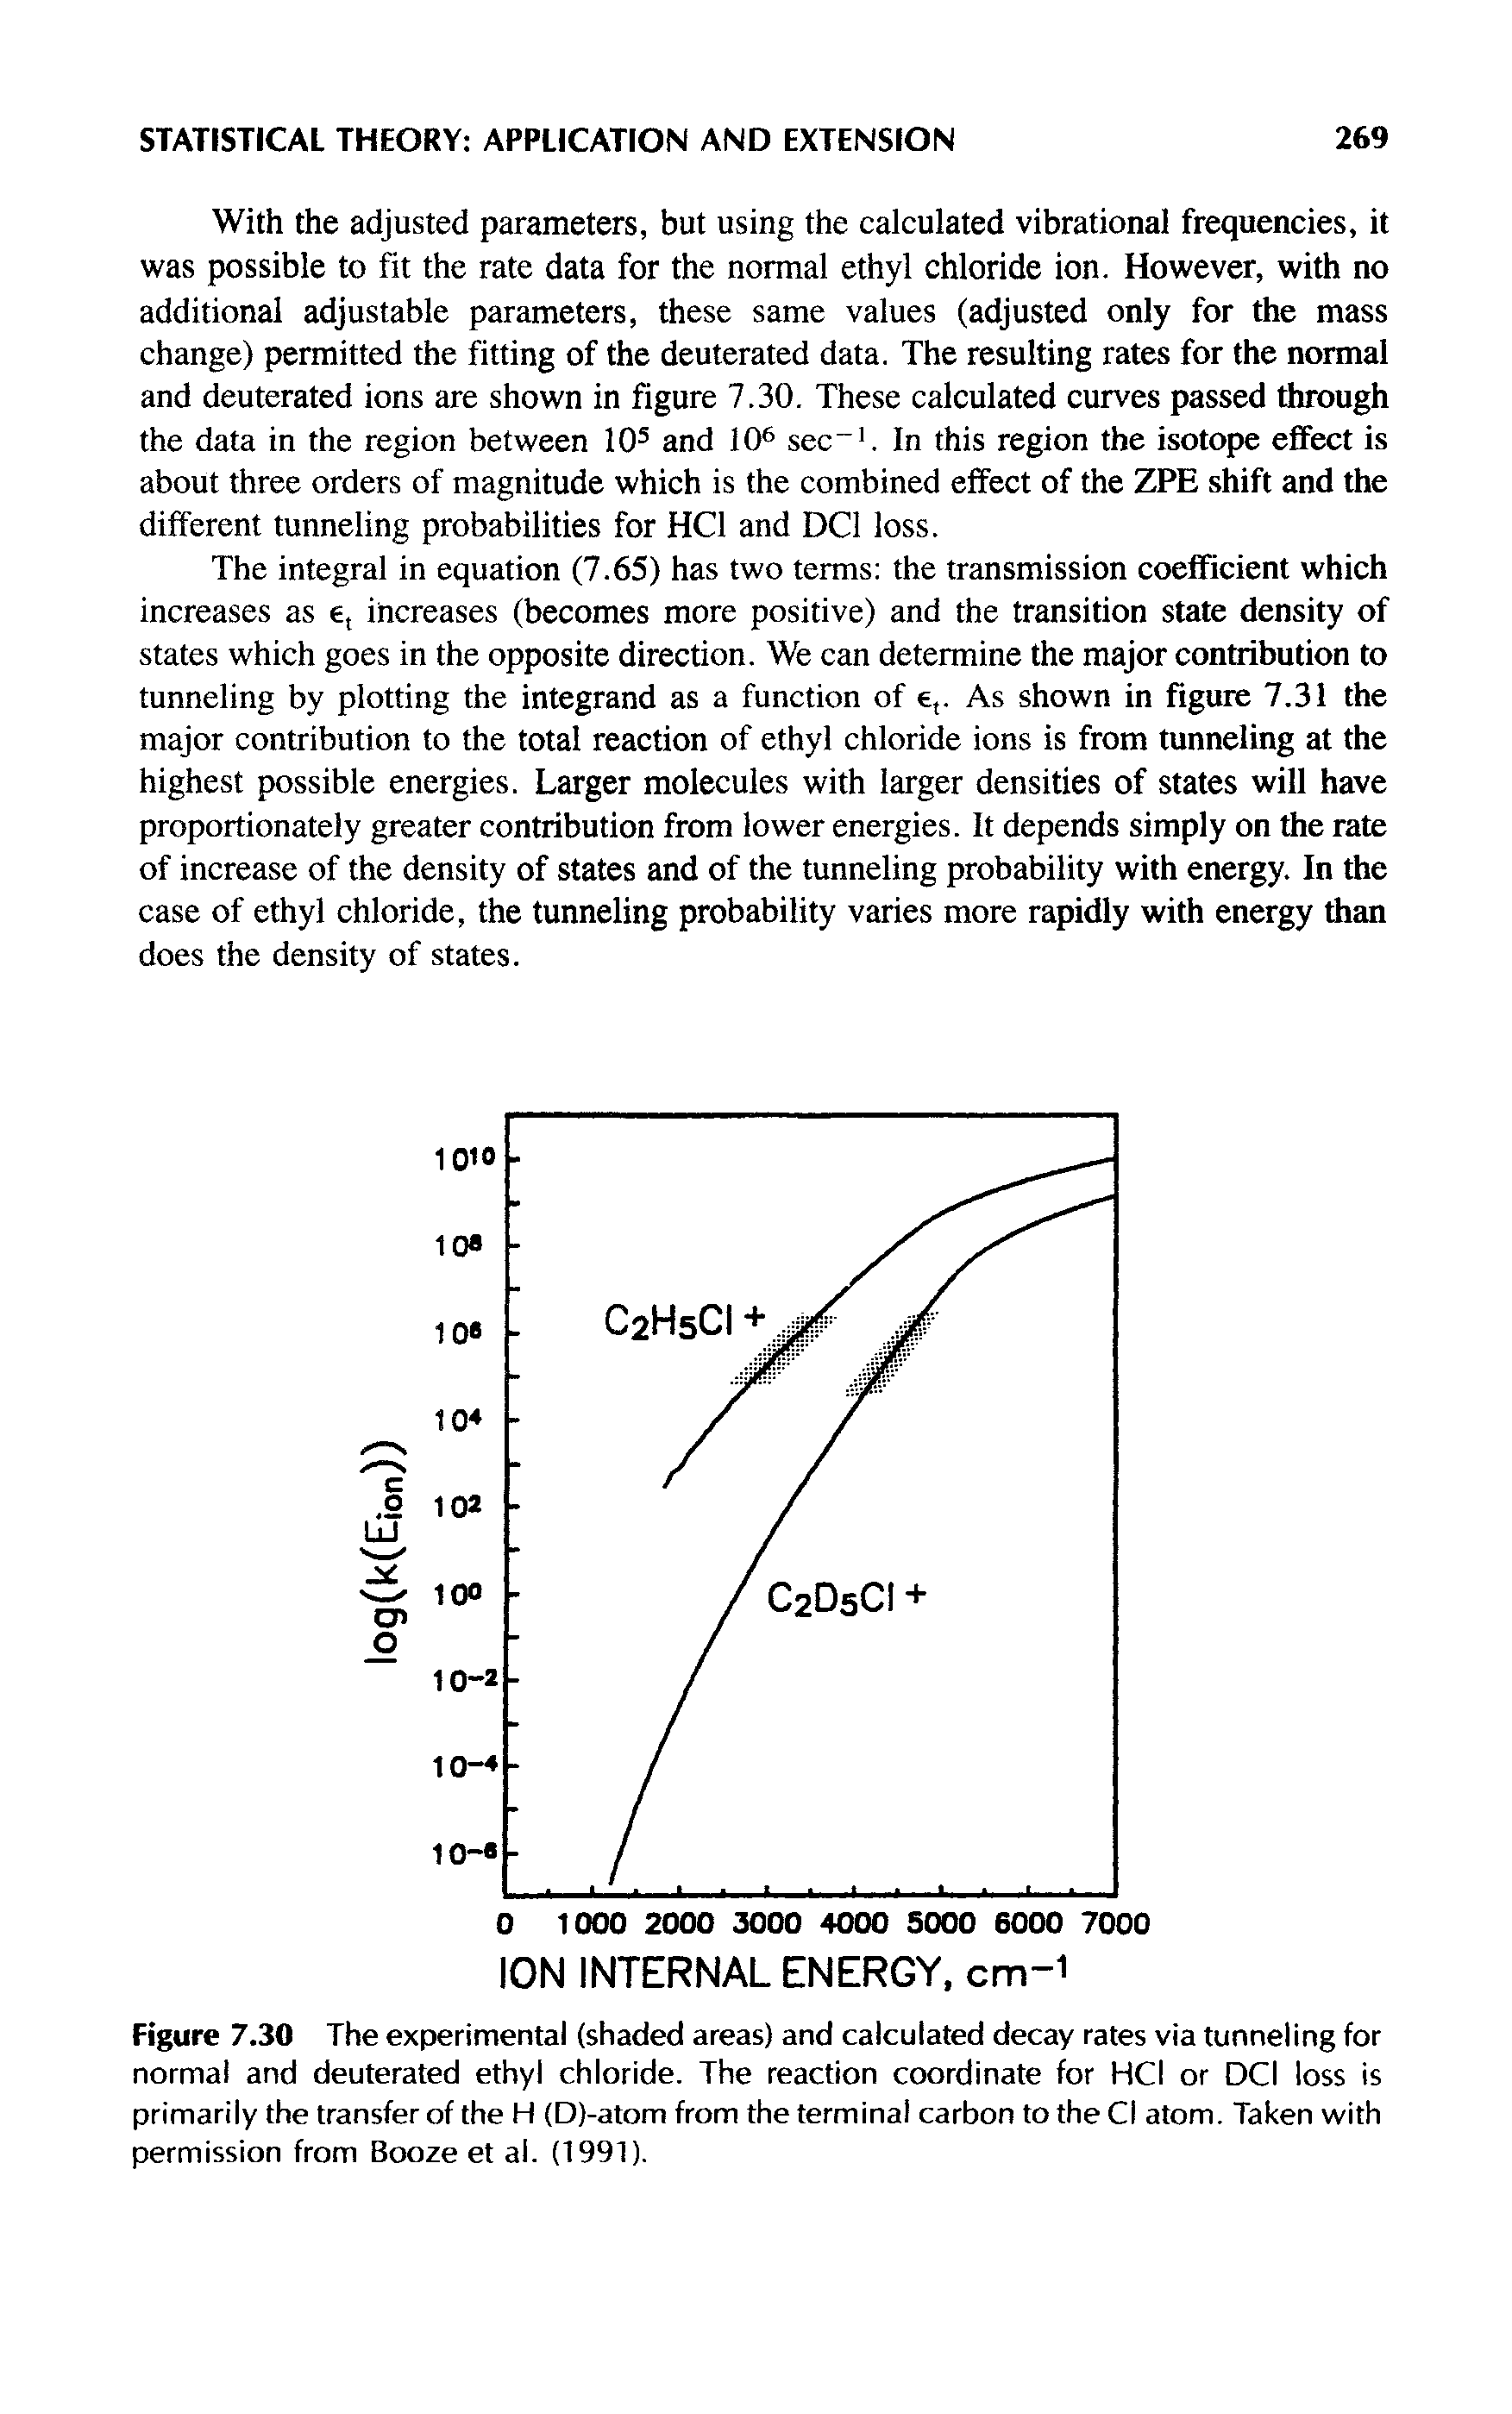 Figure 7.30 The experimental (shaded areas) and calculated decay rates via tunneling for normal and deuterated ethyl chloride. The reaction coordinate for HCl or DCl loss is primarily the transfer of the H (D)-atom from the terminal carbon to the Cl atom. Taken with permission from Booze et al. (1991).